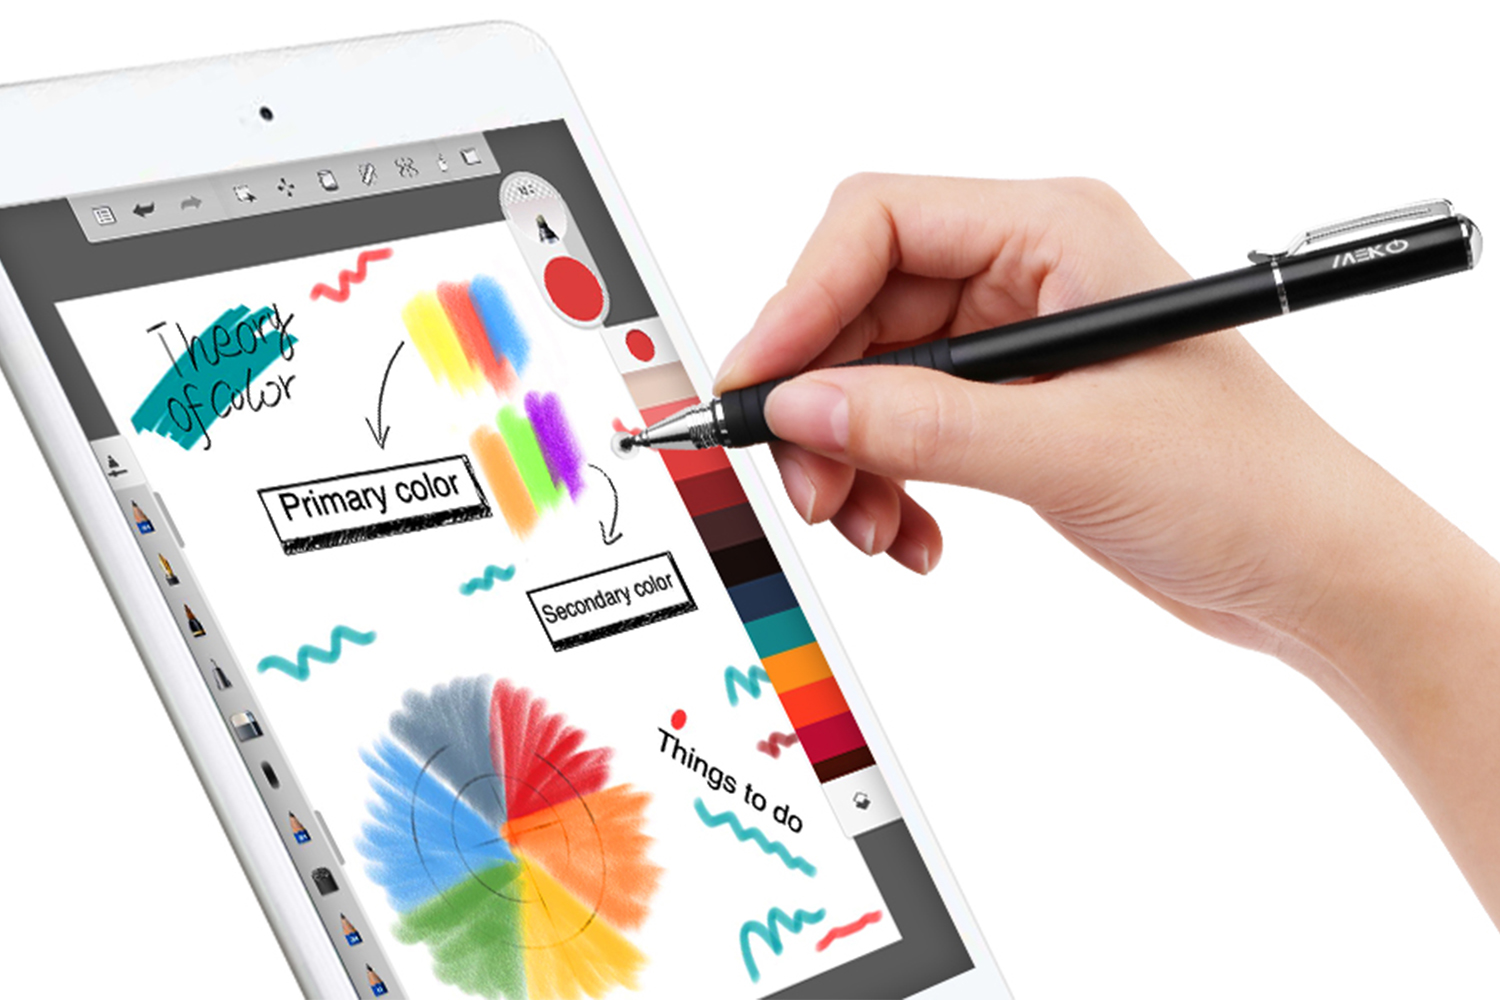 Best Stylus For Note Takers And Artists